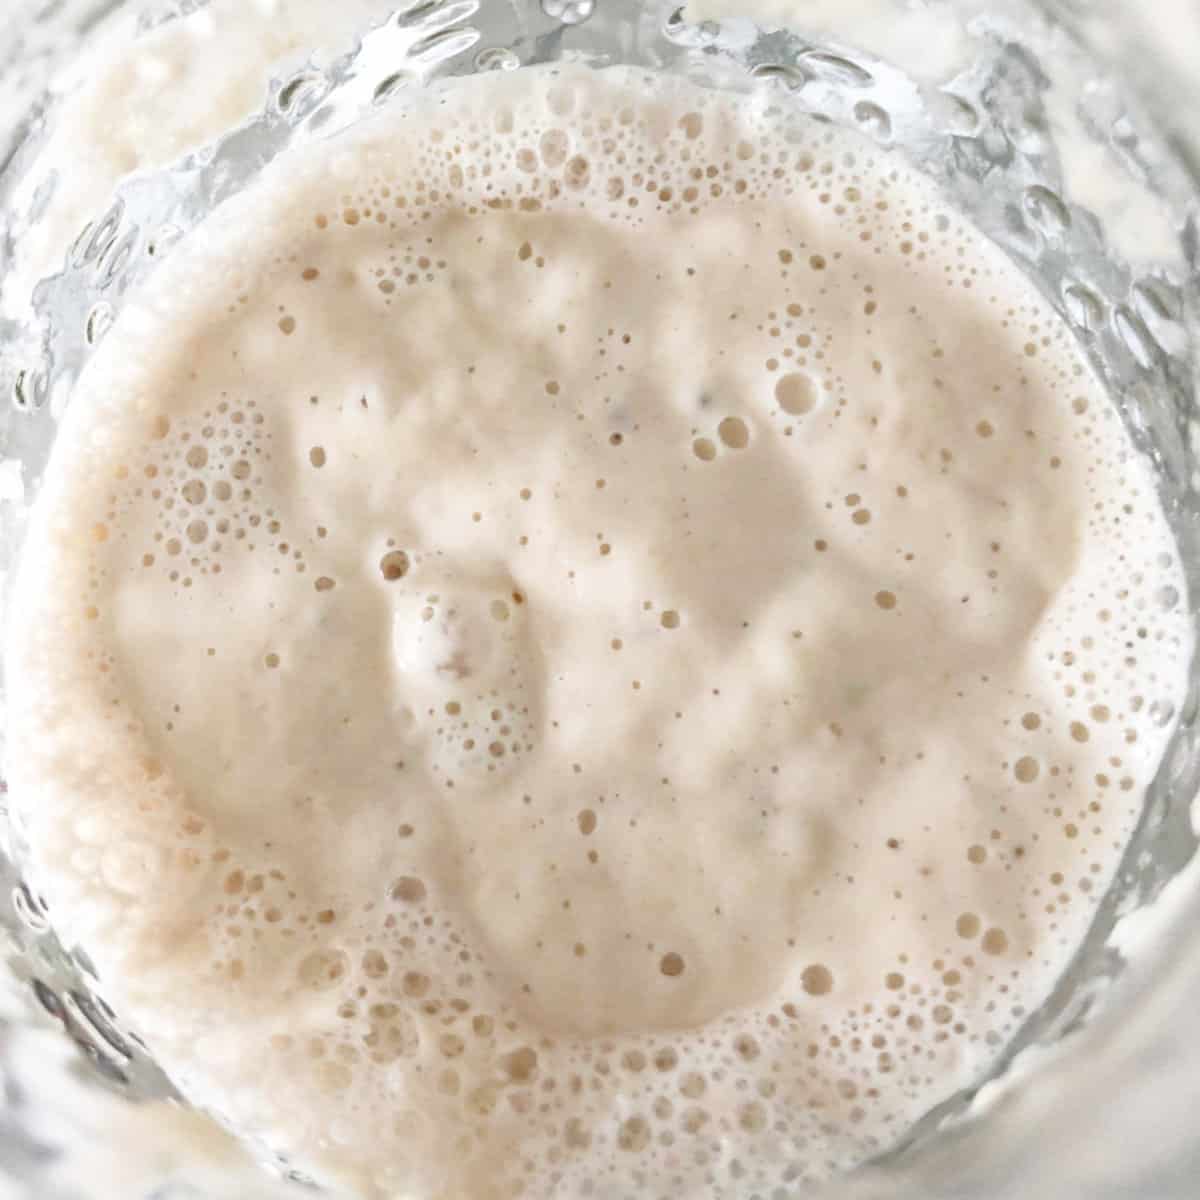 Close up of the sourdough starter to show the fermentation and bubbles.